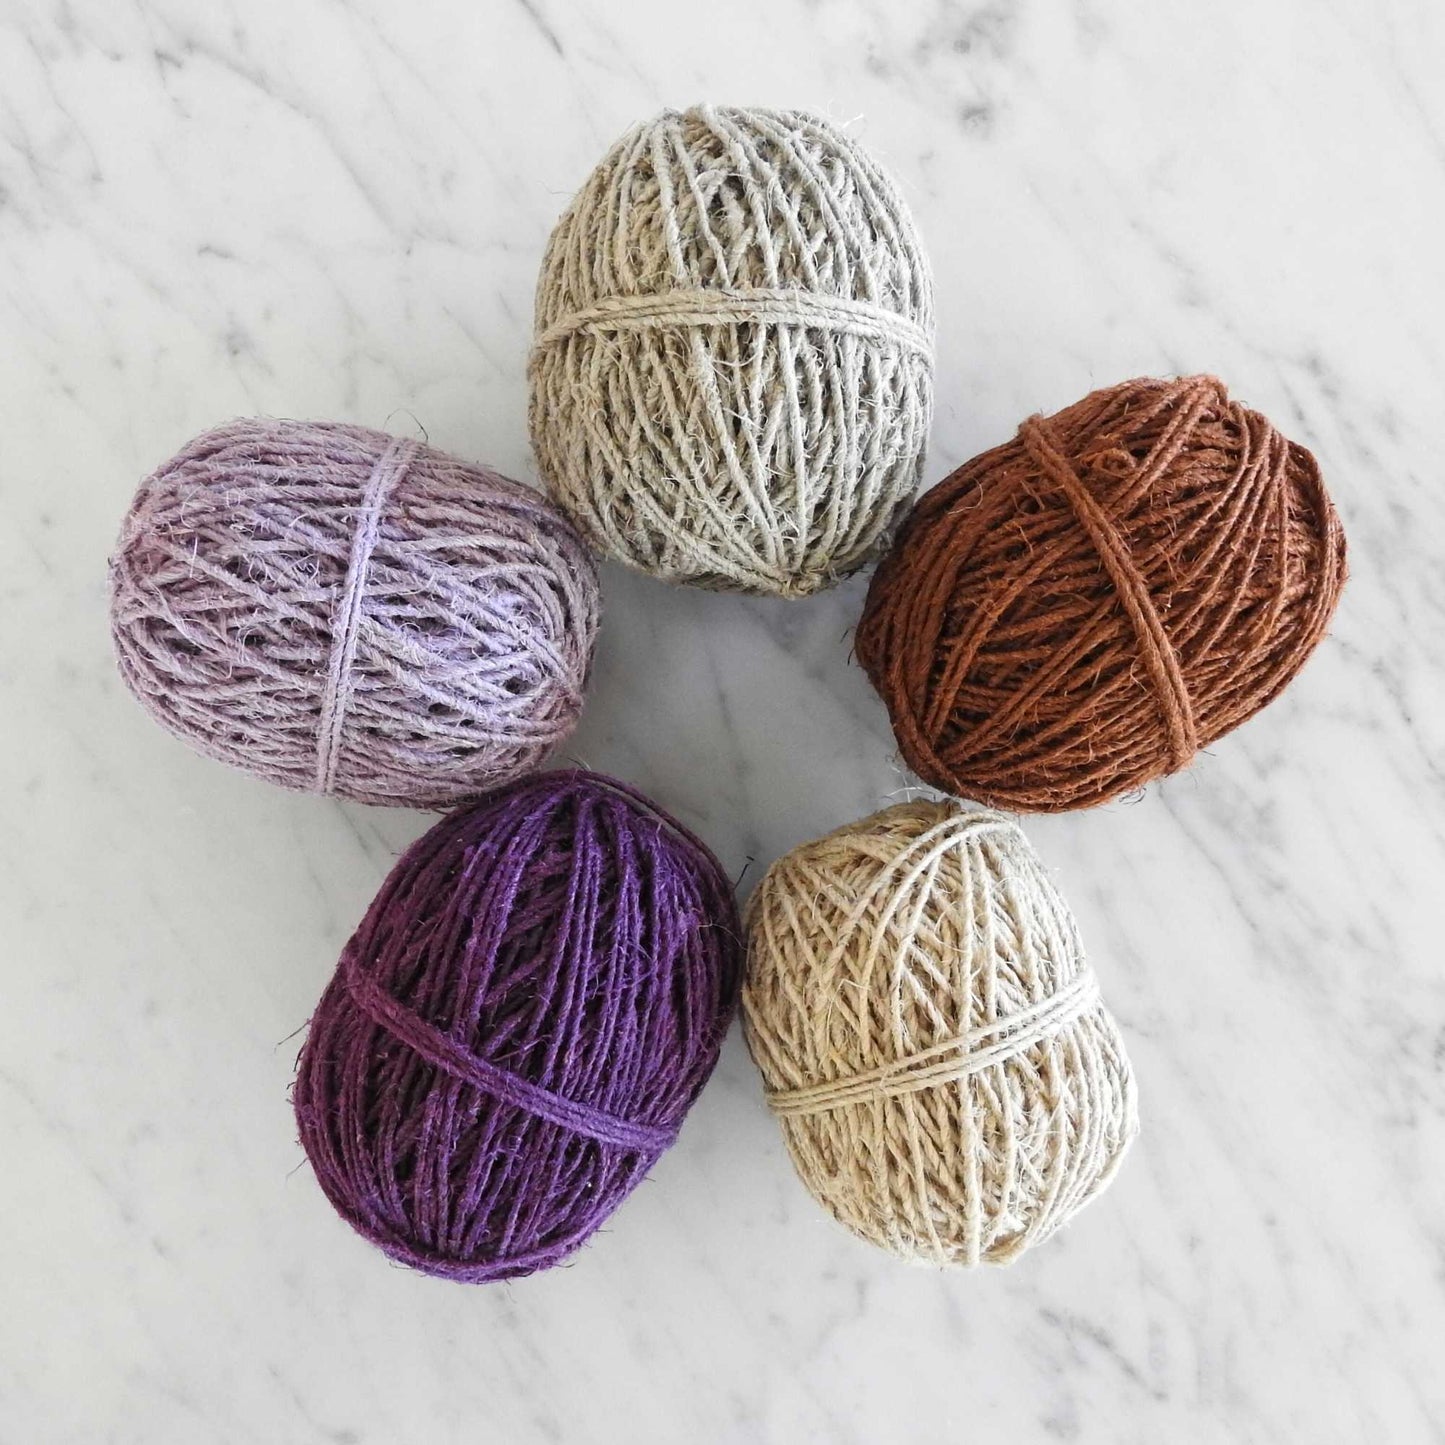 balls of hemp yarn for baskets, bags, hats, mats, garden, craft. Crochet, weave or knit with our natural hemp yarn. sustainably grown and fairtrade